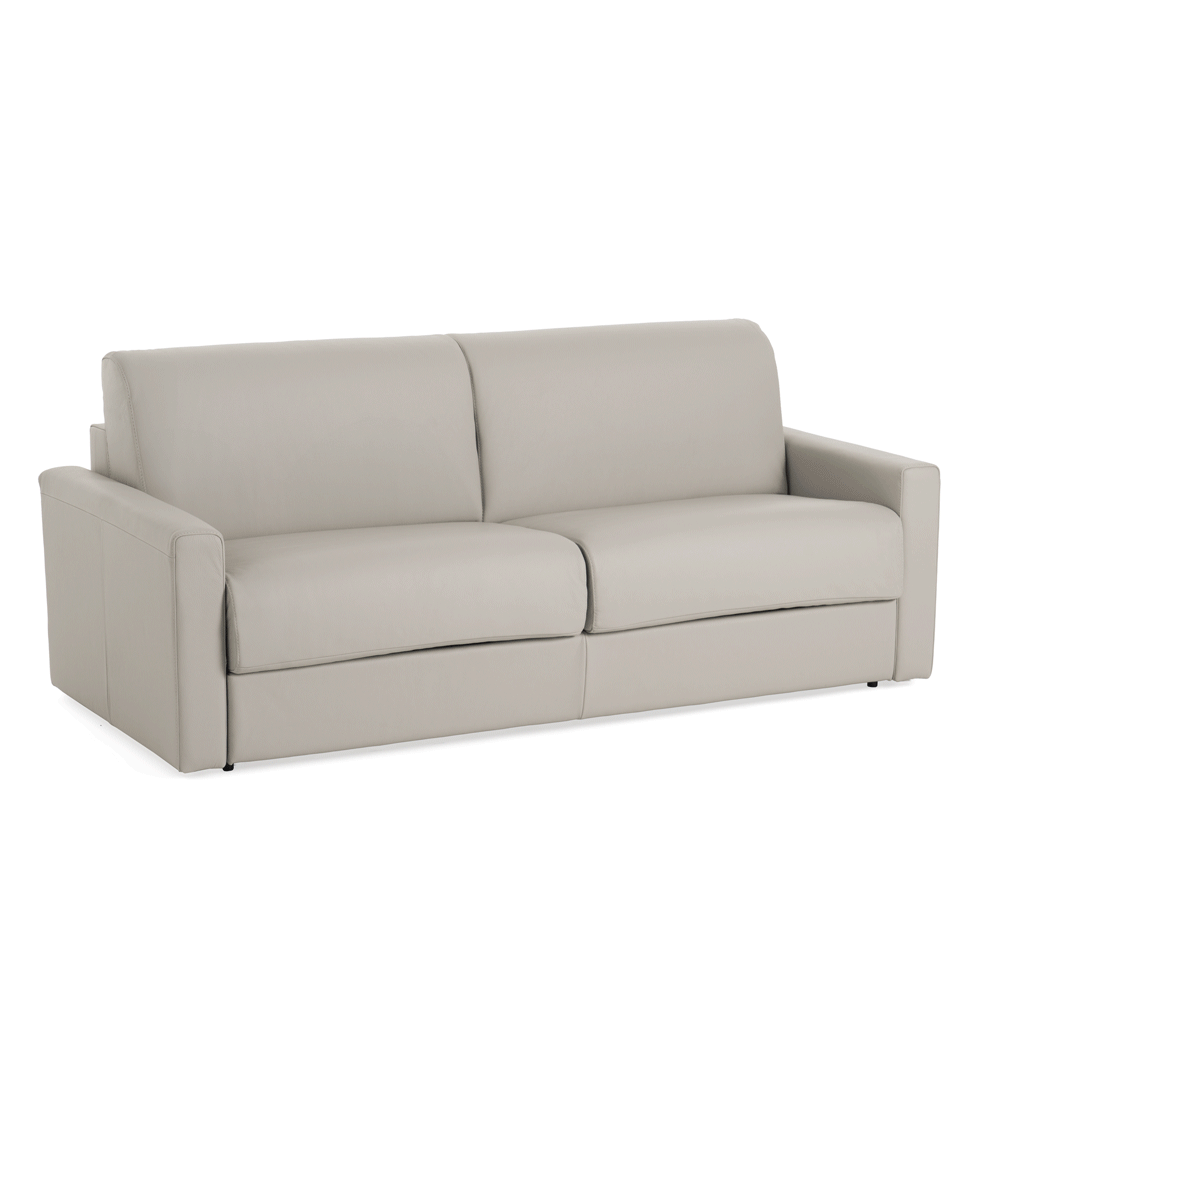 Lamod Italia Revers - Italian Modern Grey Leather Queen Sofabed